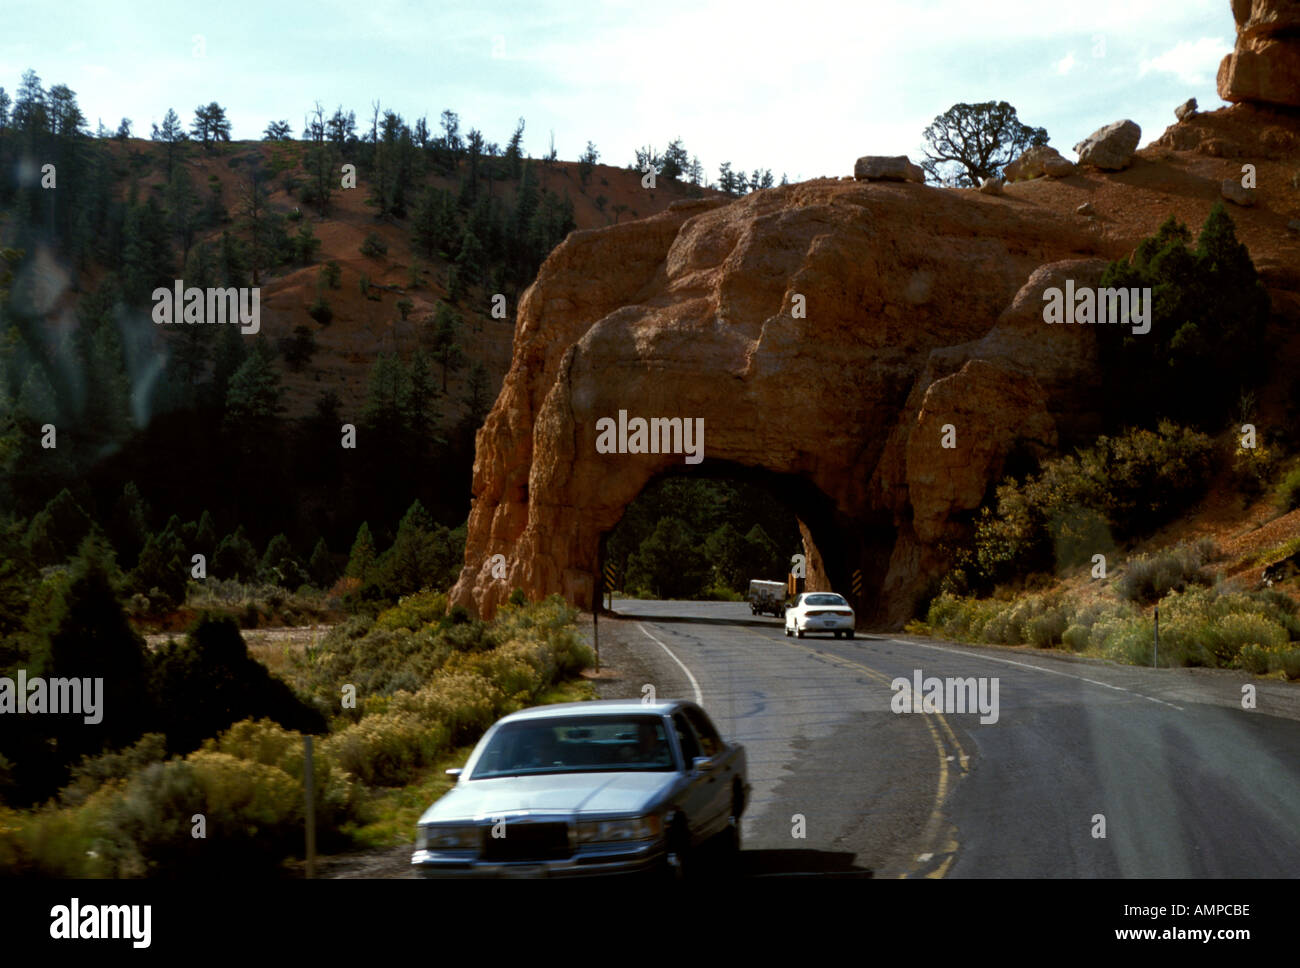 UT Utah Arch or Tunnel seen on highway road from Zion National Park to Bryce Canyon National Park Stock Photo